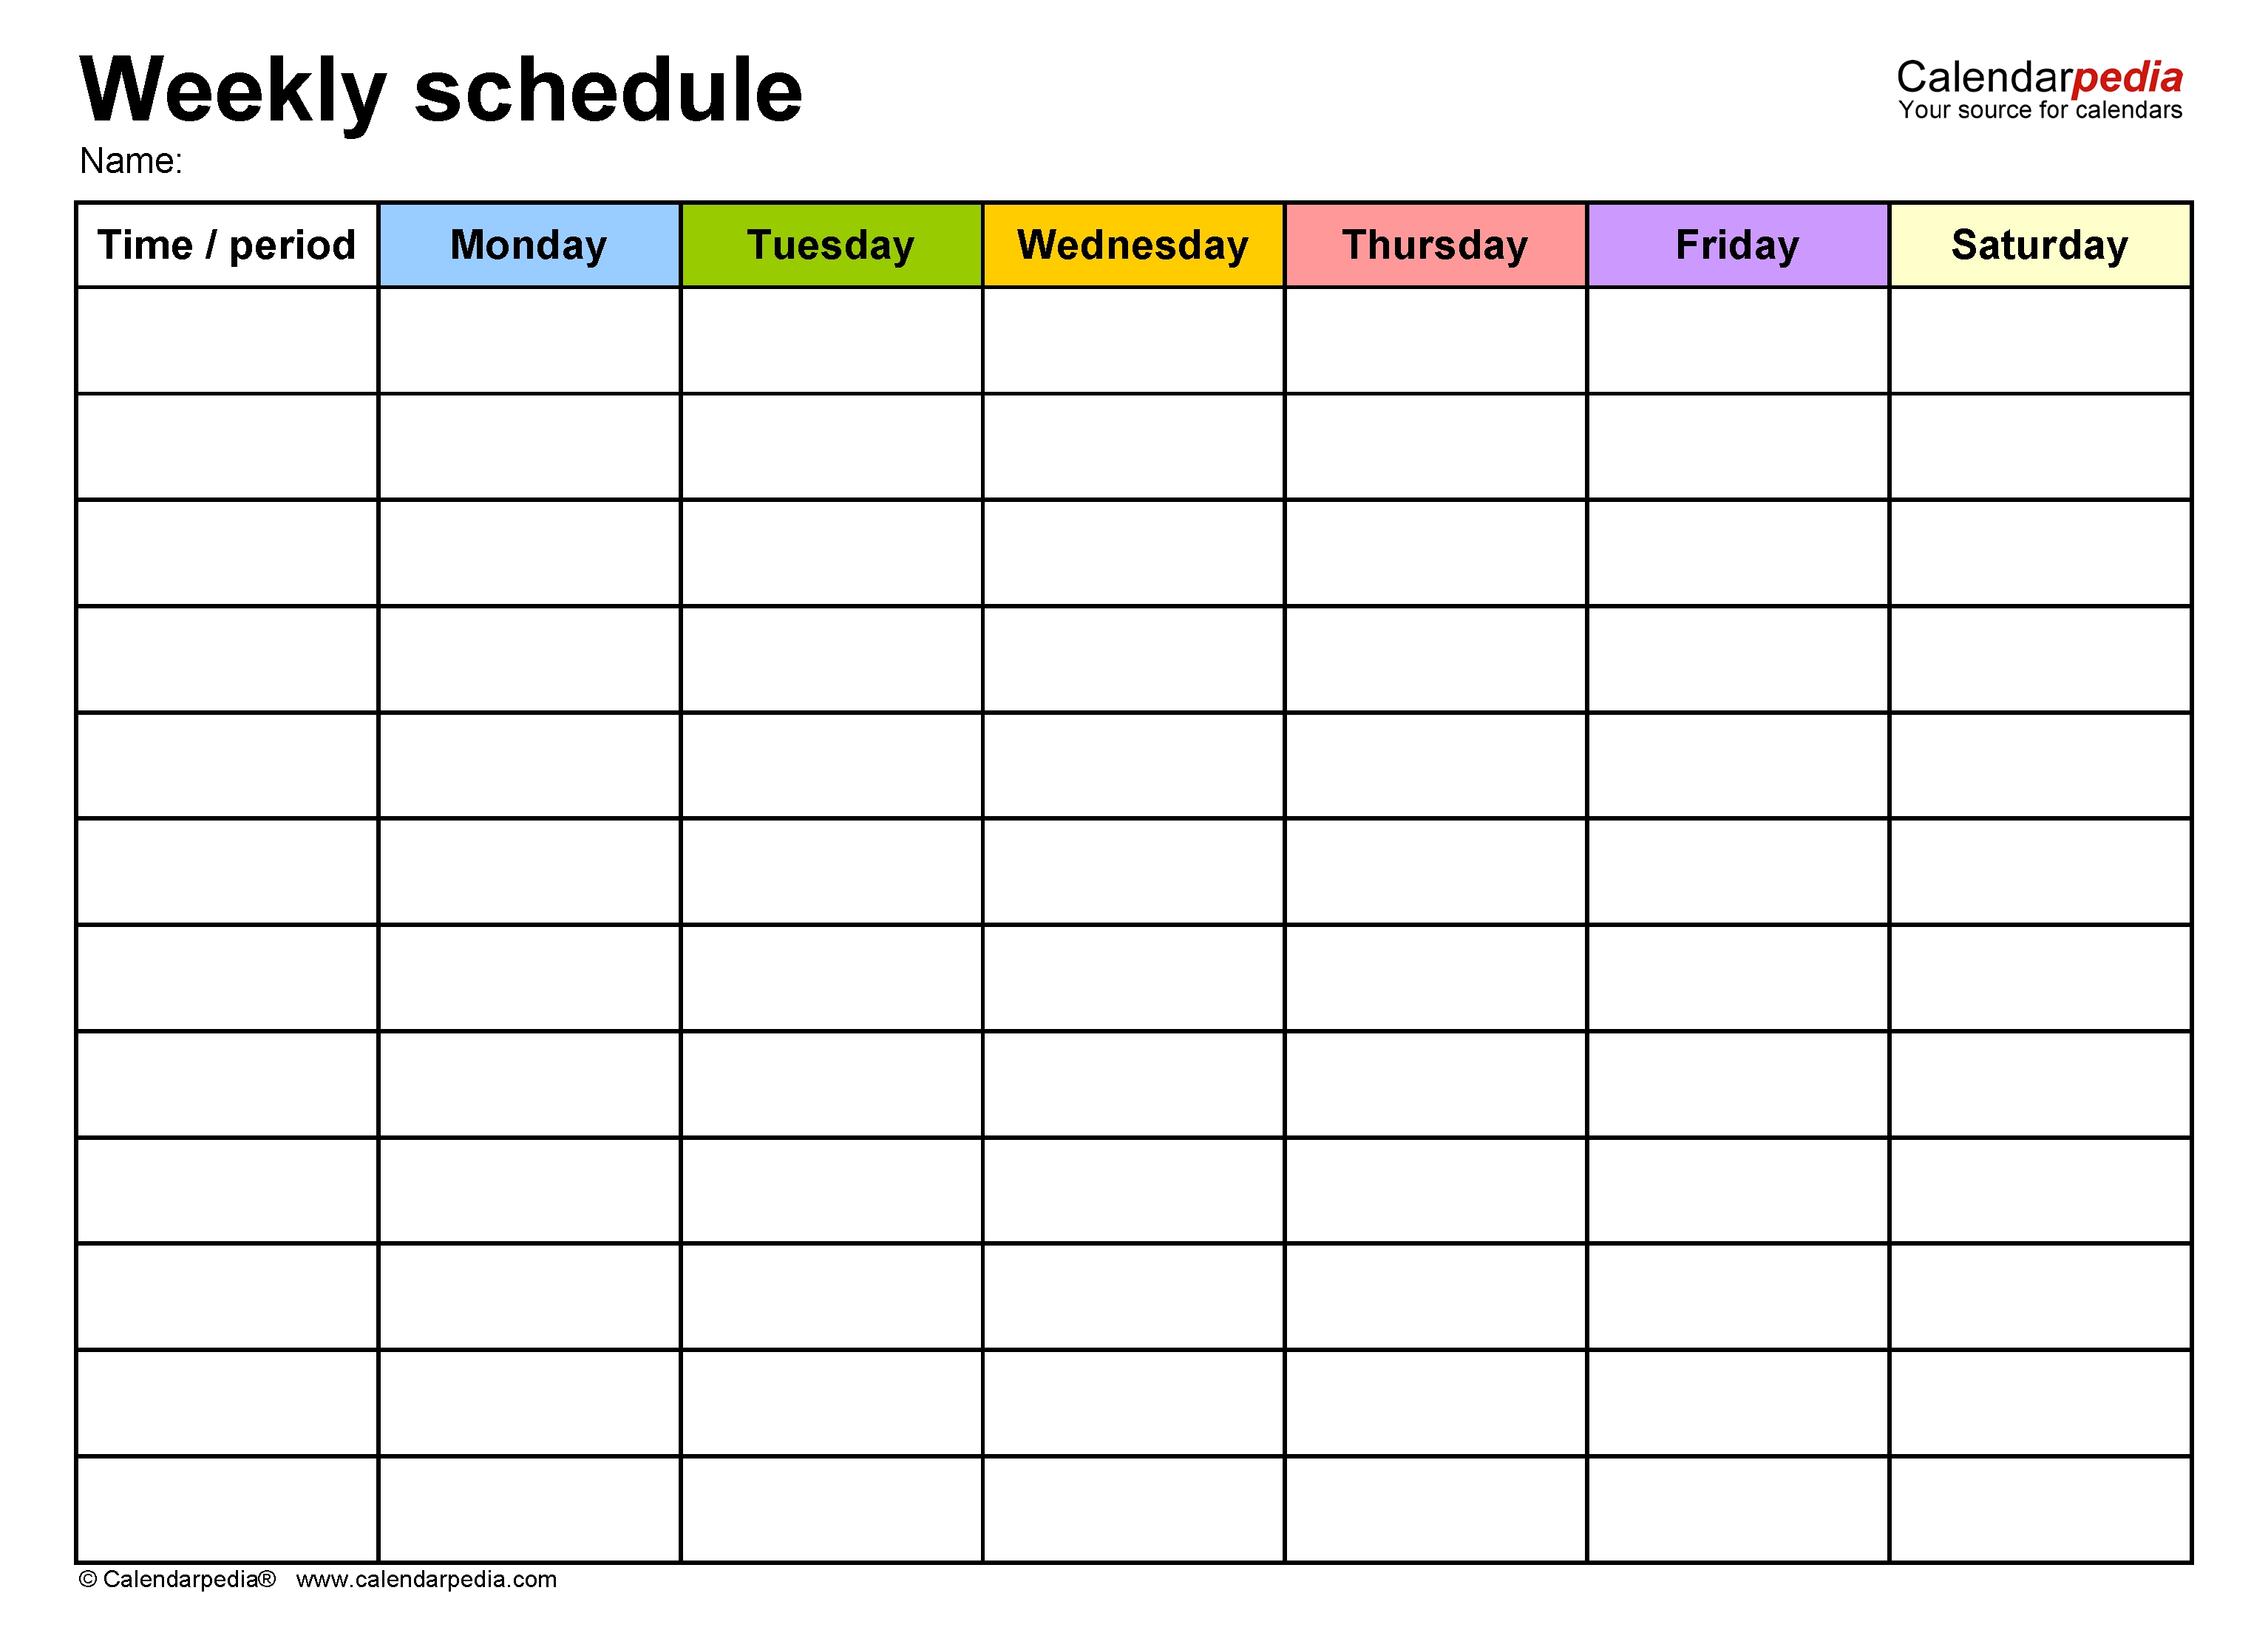 Free Weekly Schedule Templates For Word - 18 Templates-5 Day Week Calender Template